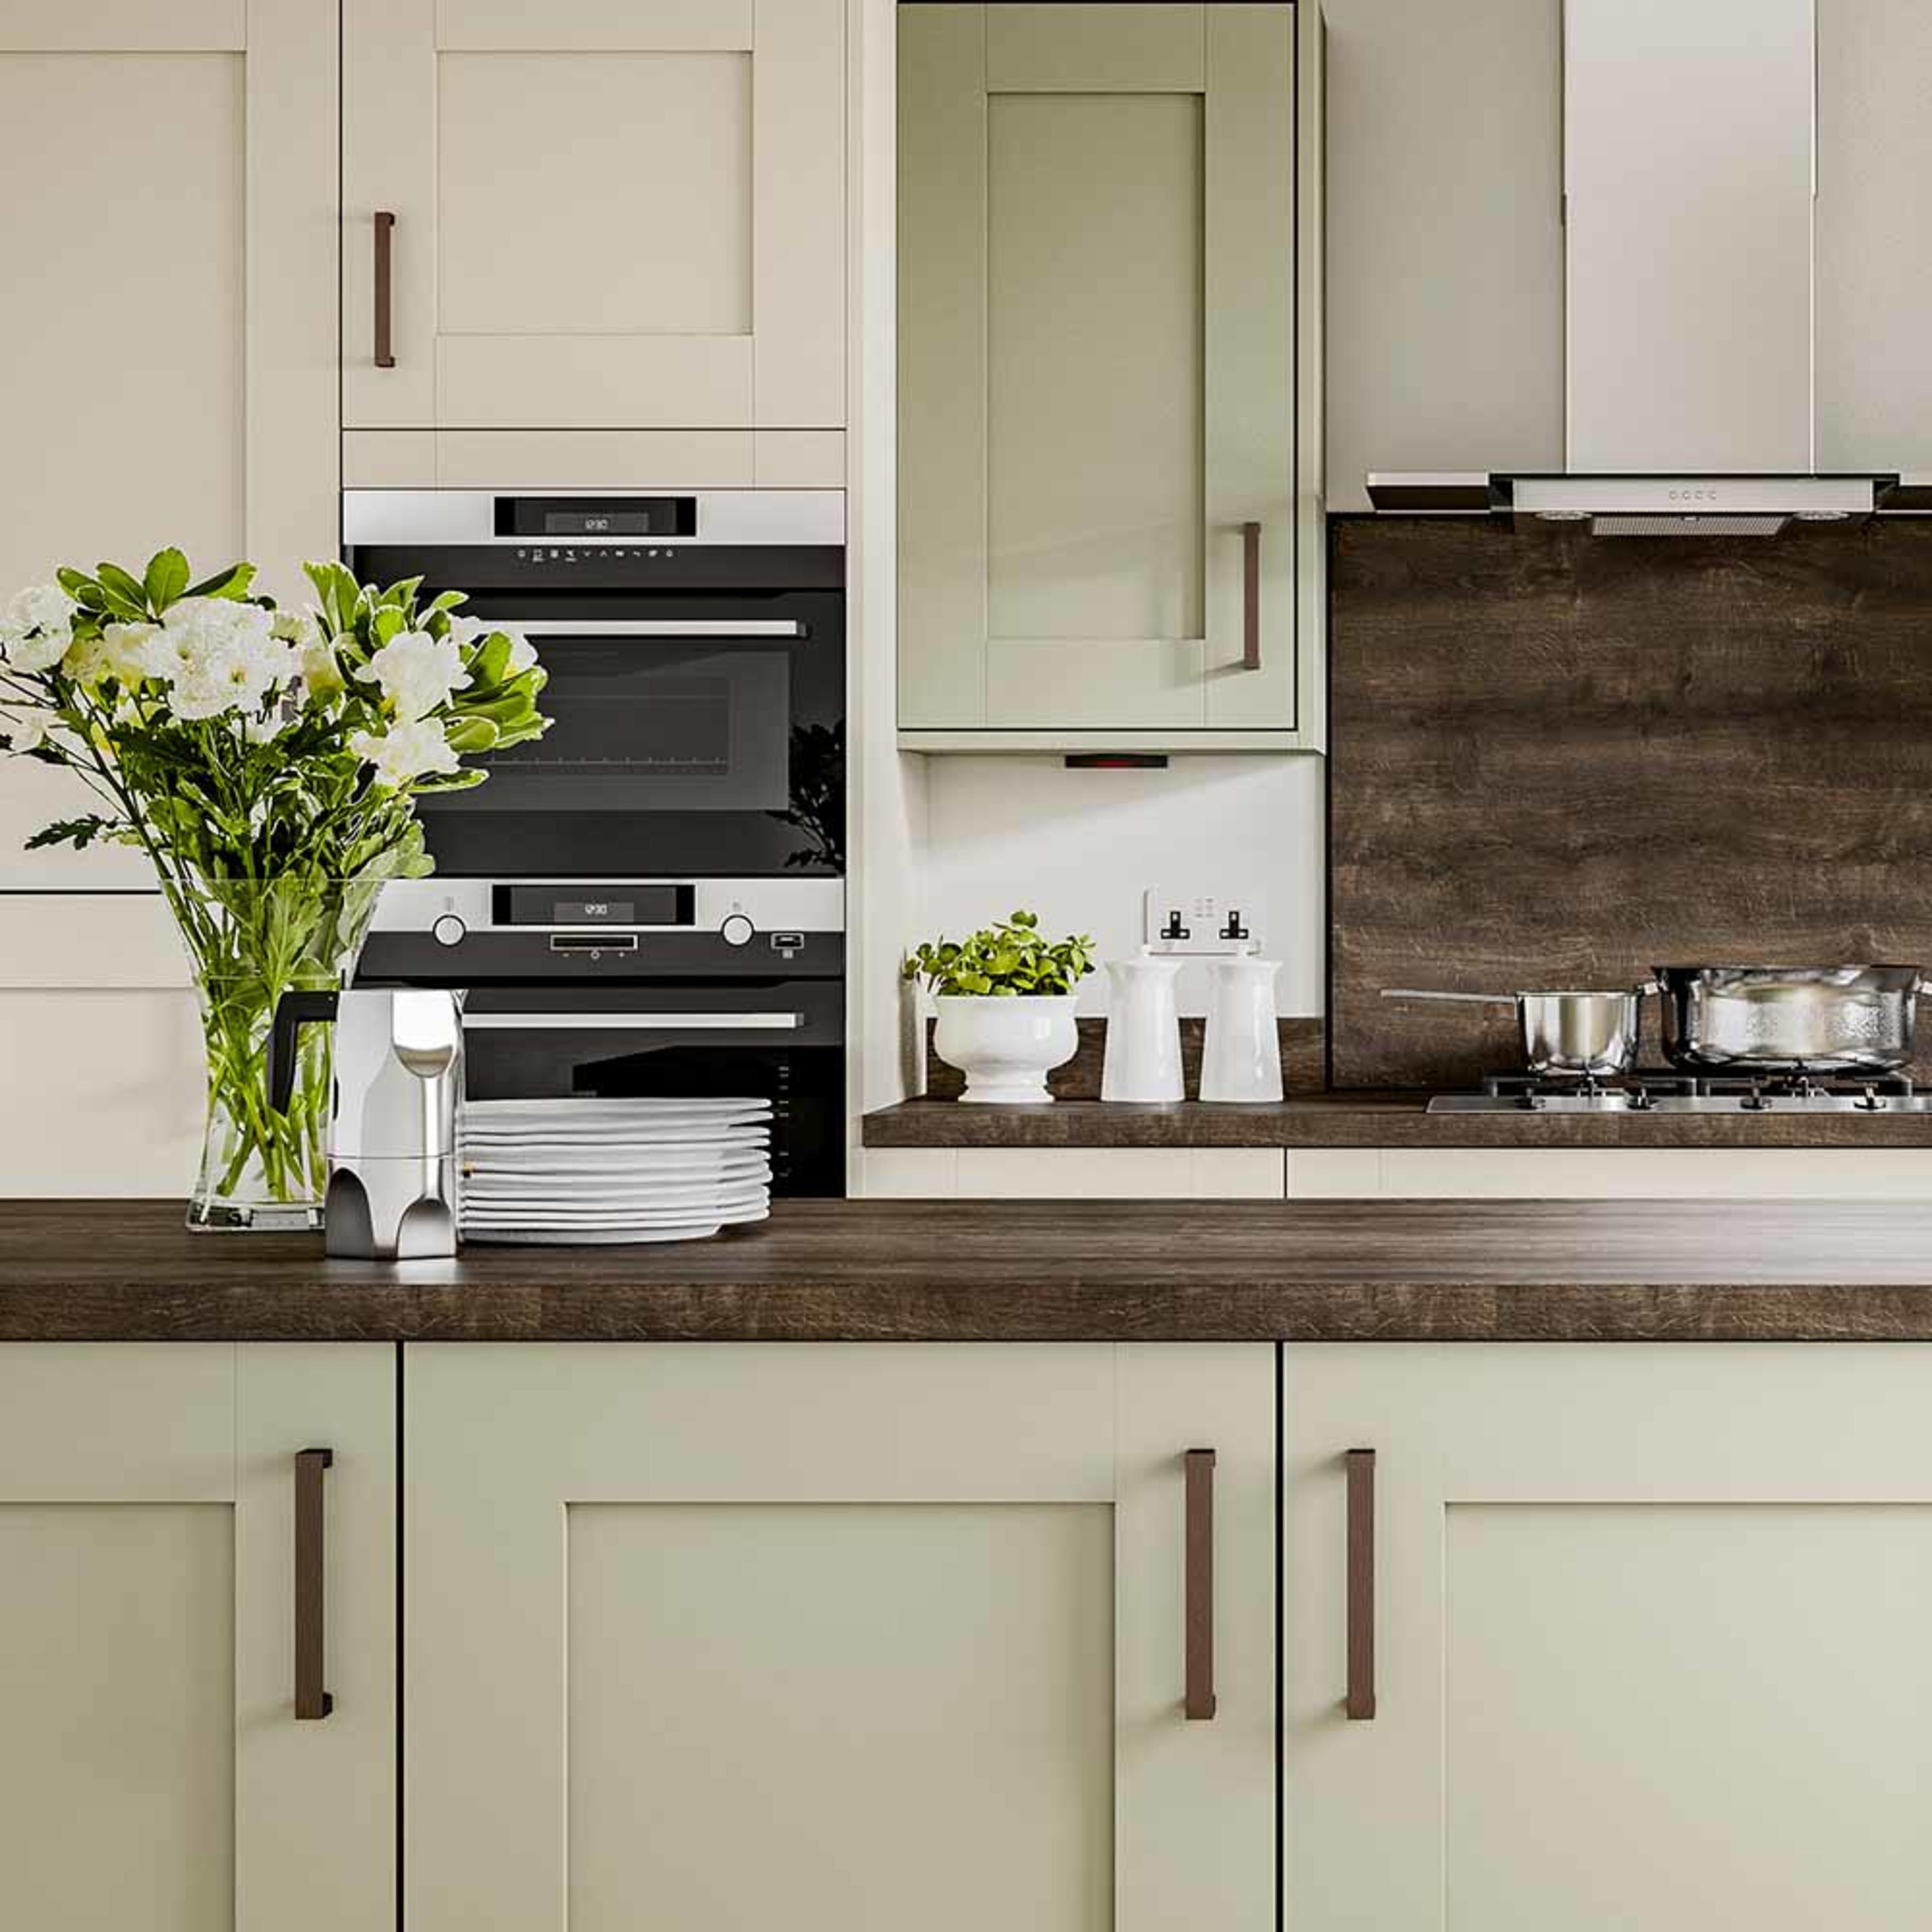 persona-homes-specification-kitchen-symphony-unbranded-oven-cream-units-wooden-wortktops